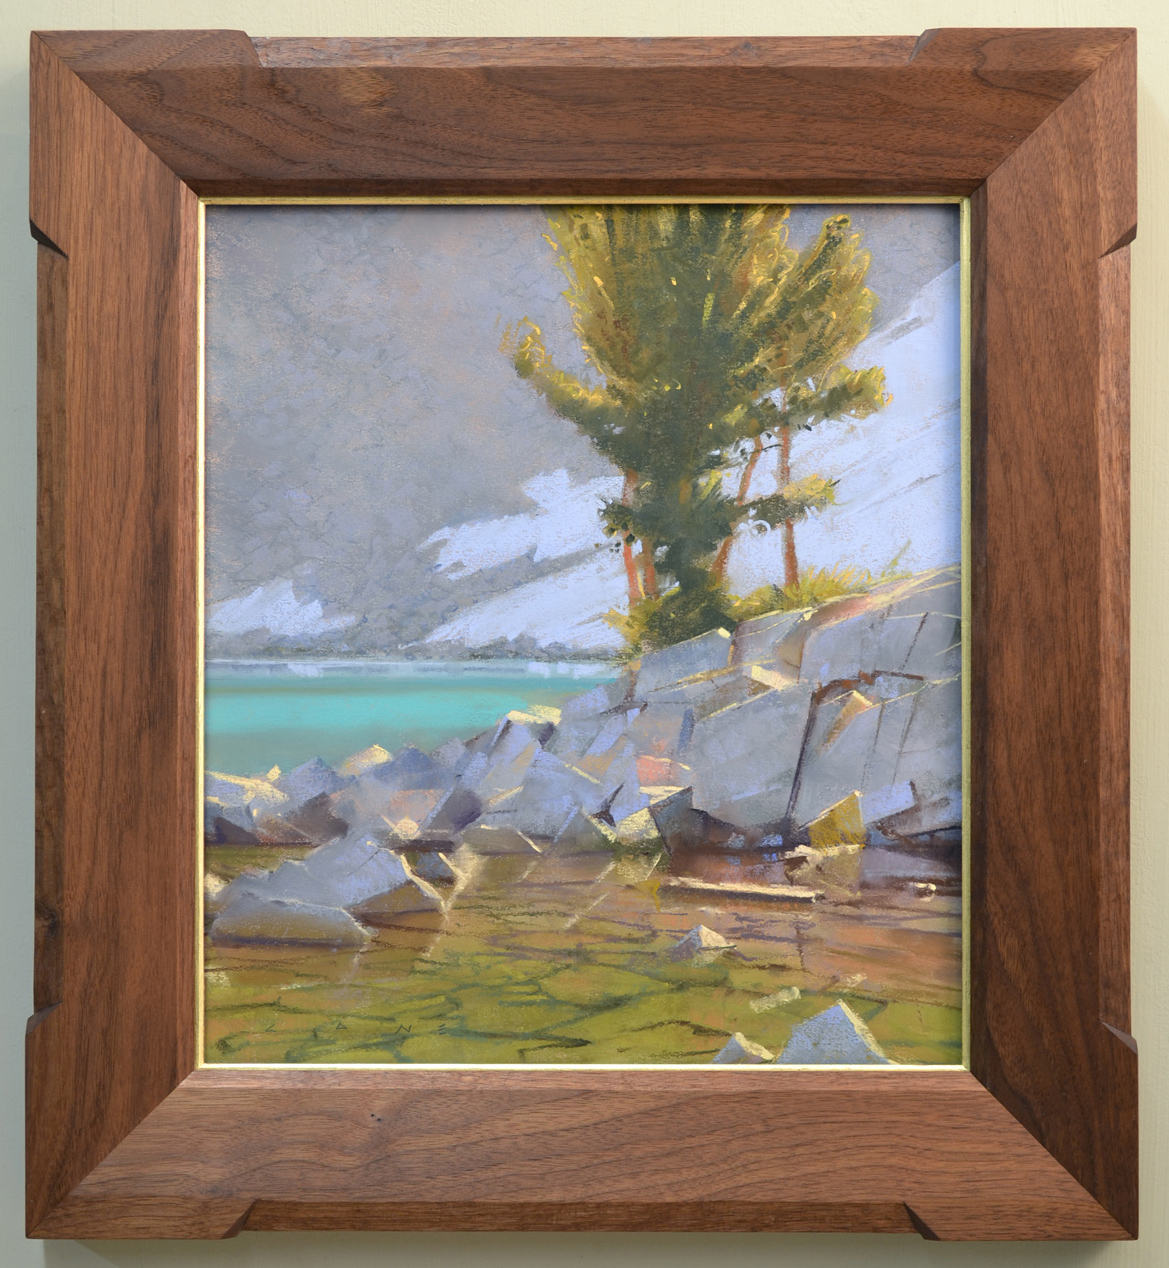 Framing paintings - Timothy Holton - RealismToday.com